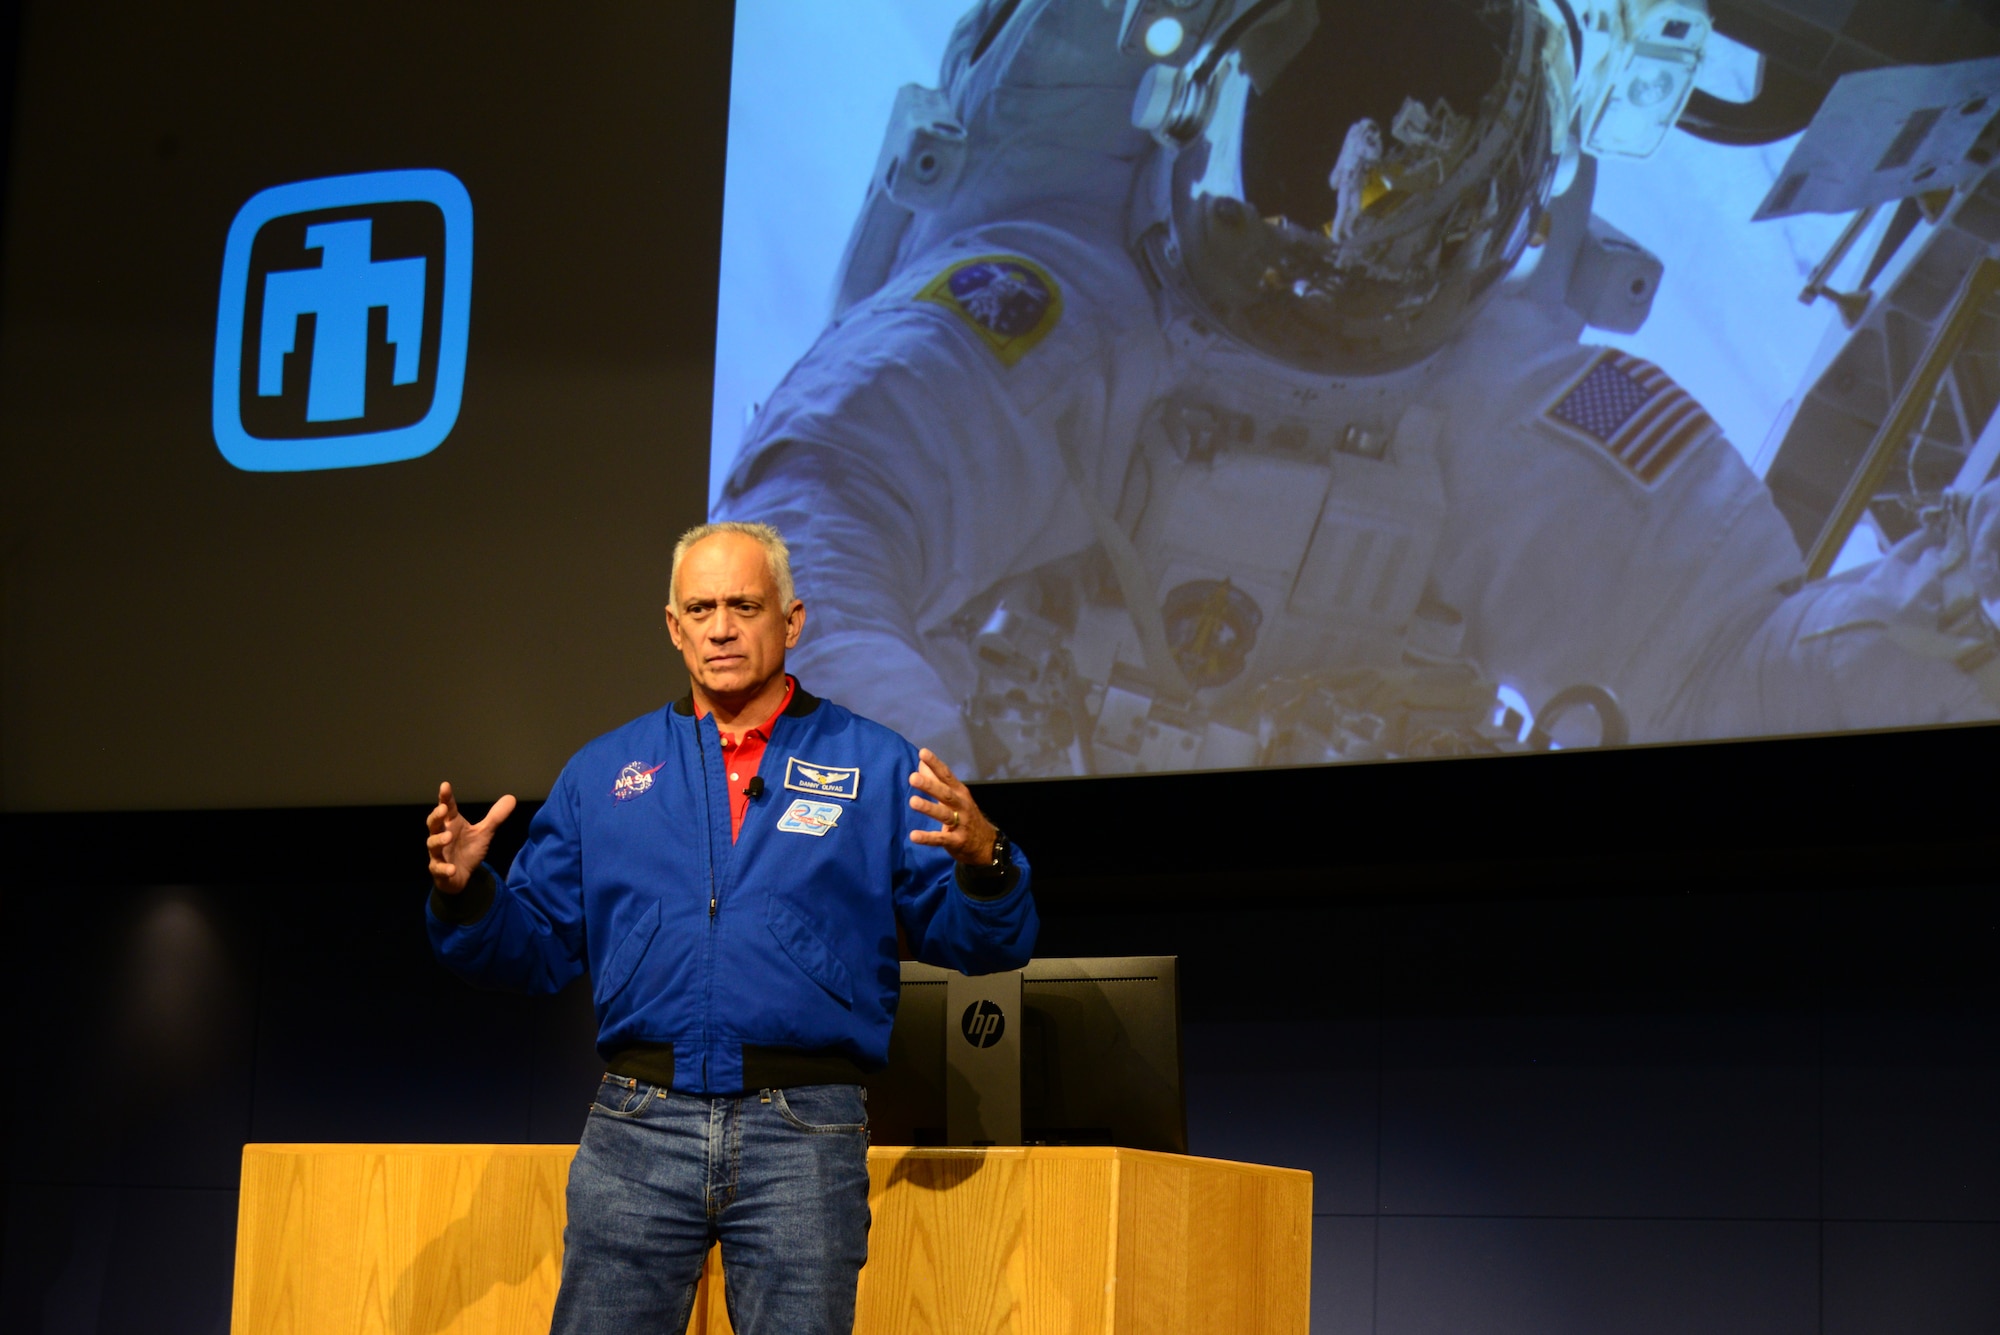 John Olivias, an American engineer and a former NASA astronaut, gives a presentation in the Steve Schiff Auditorium of Sandia National Laboratories on Sept. 25, 2019. Sandia hosted the event where participants sampled Hispanic foods, viewed and judged student artwork and listened to Olivias talk about his contributions, and journey with NASA. This was the first event to highlight Hispanic Heritage observance month on Kirtland. The month pays tribute to the contributions that Hispanics and Latino American culture have made to the fabric of our nation. (U.S. Air Force photo by Jessie Perkins)